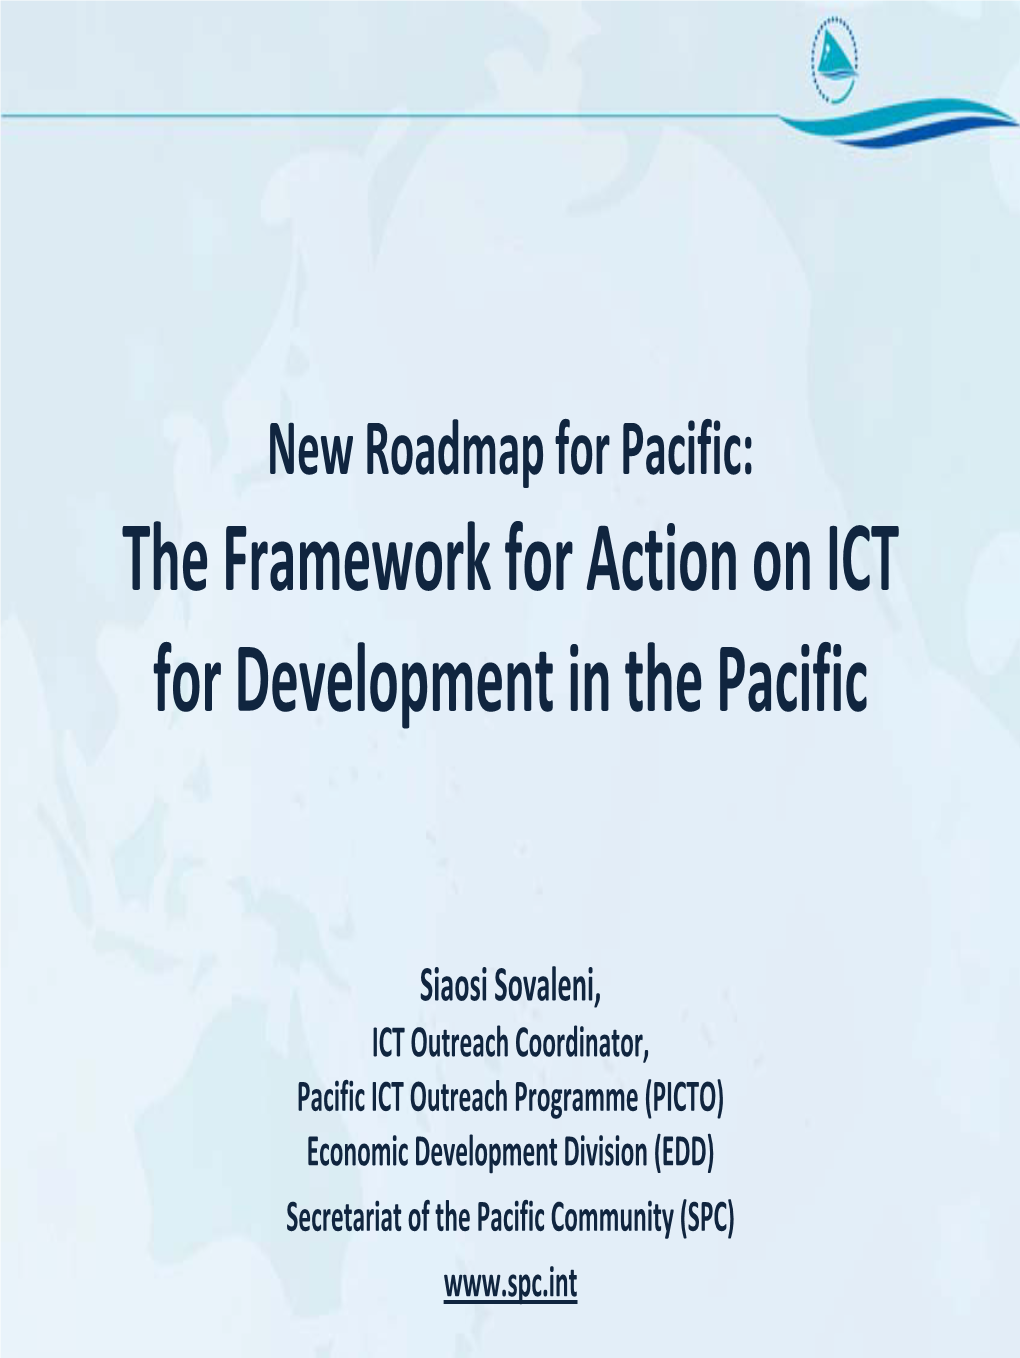 ICT for Development in the Pacific